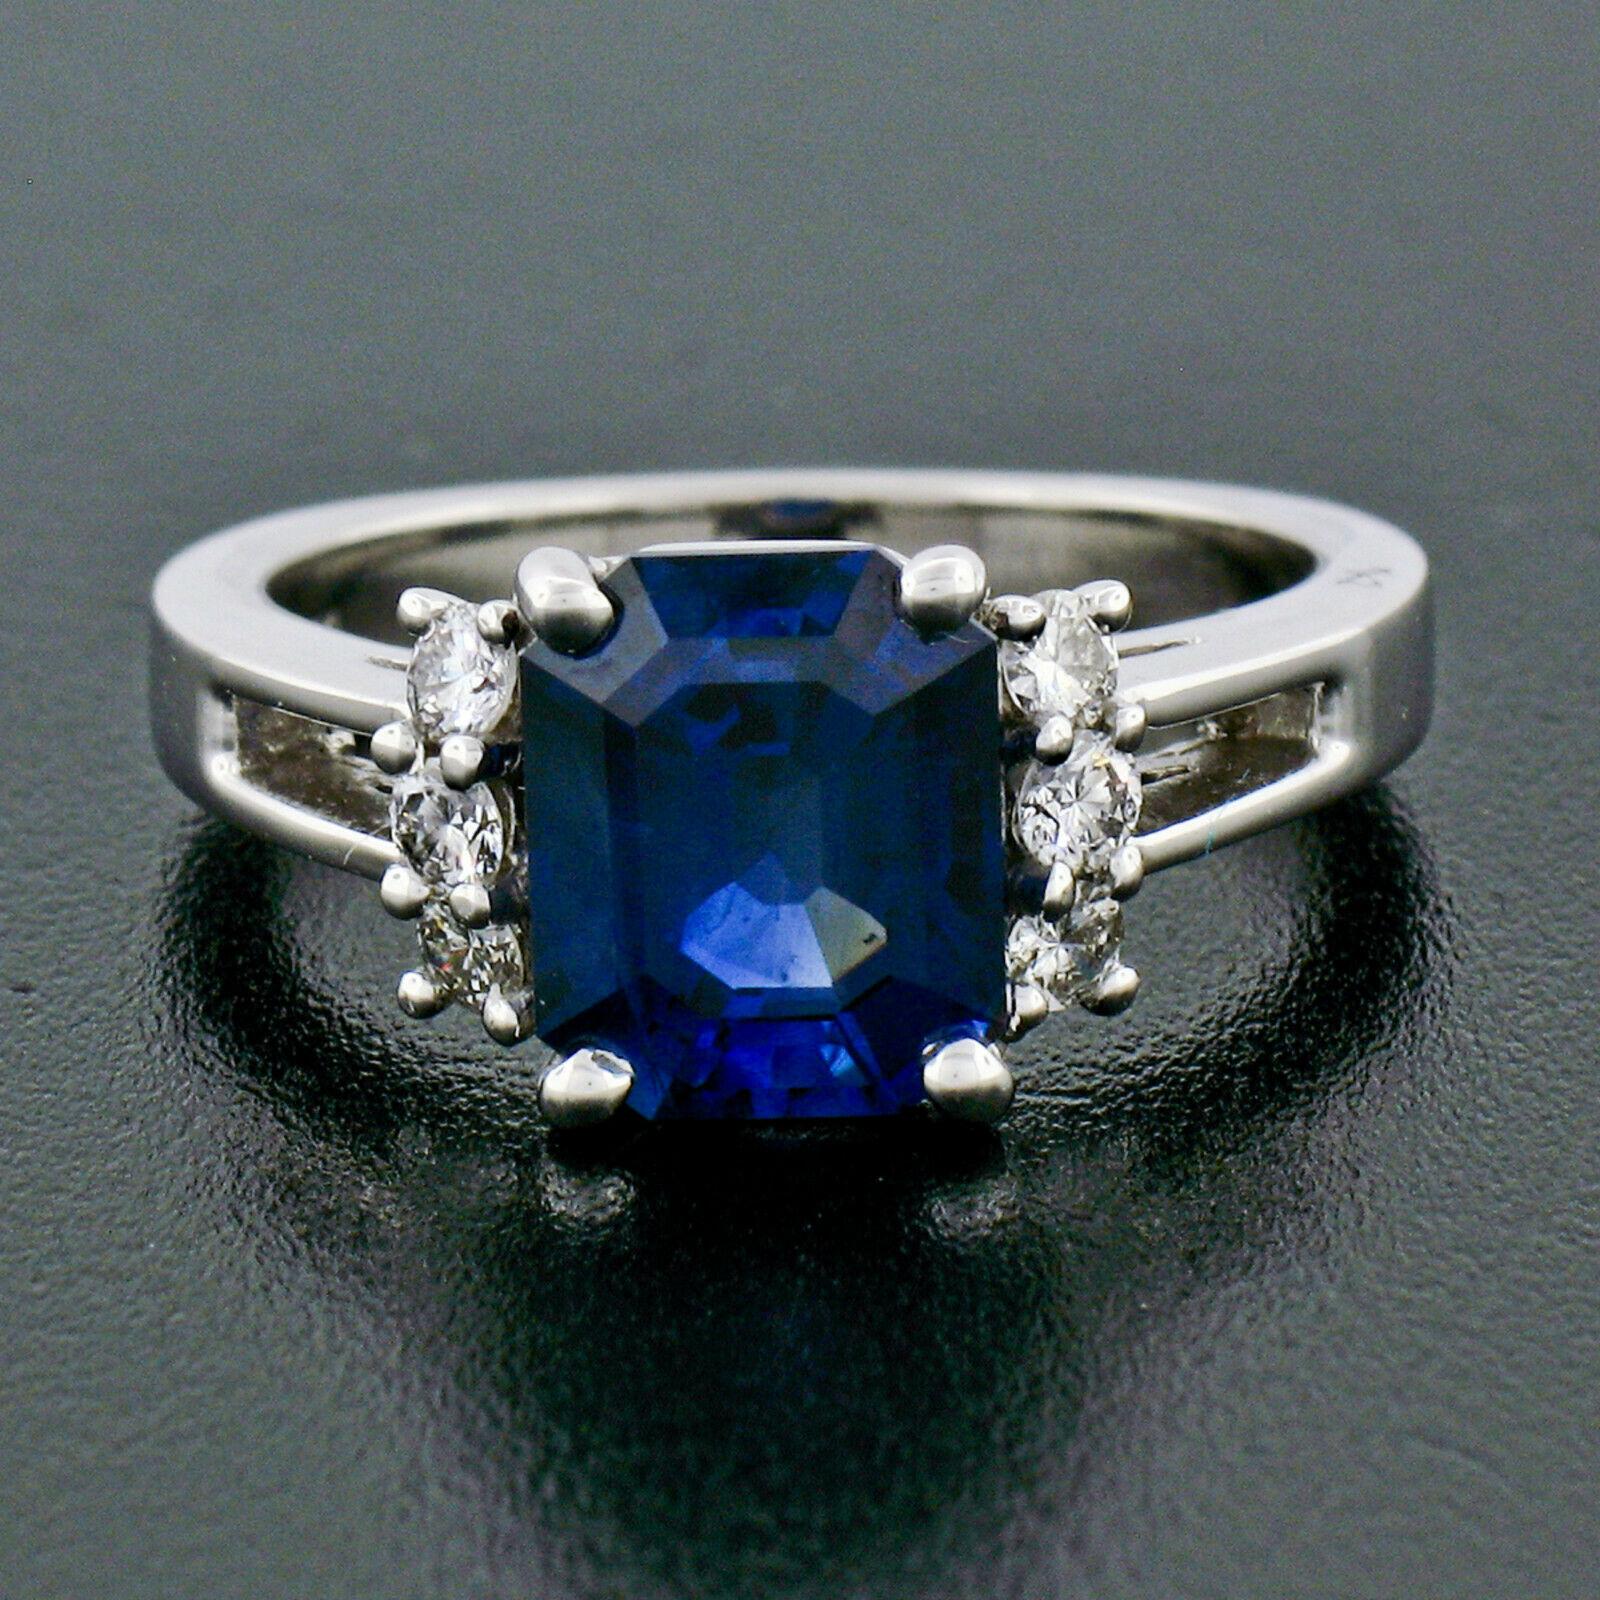 This breathtaking sapphire and diamond ring is designed by Kurt Wayne and crafted in solid 18k white gold. It features a gorgeous, AGL certified, genuine sapphire solitaire. The cut-cornered emerald cut sapphire has an amazingly rich royal blue